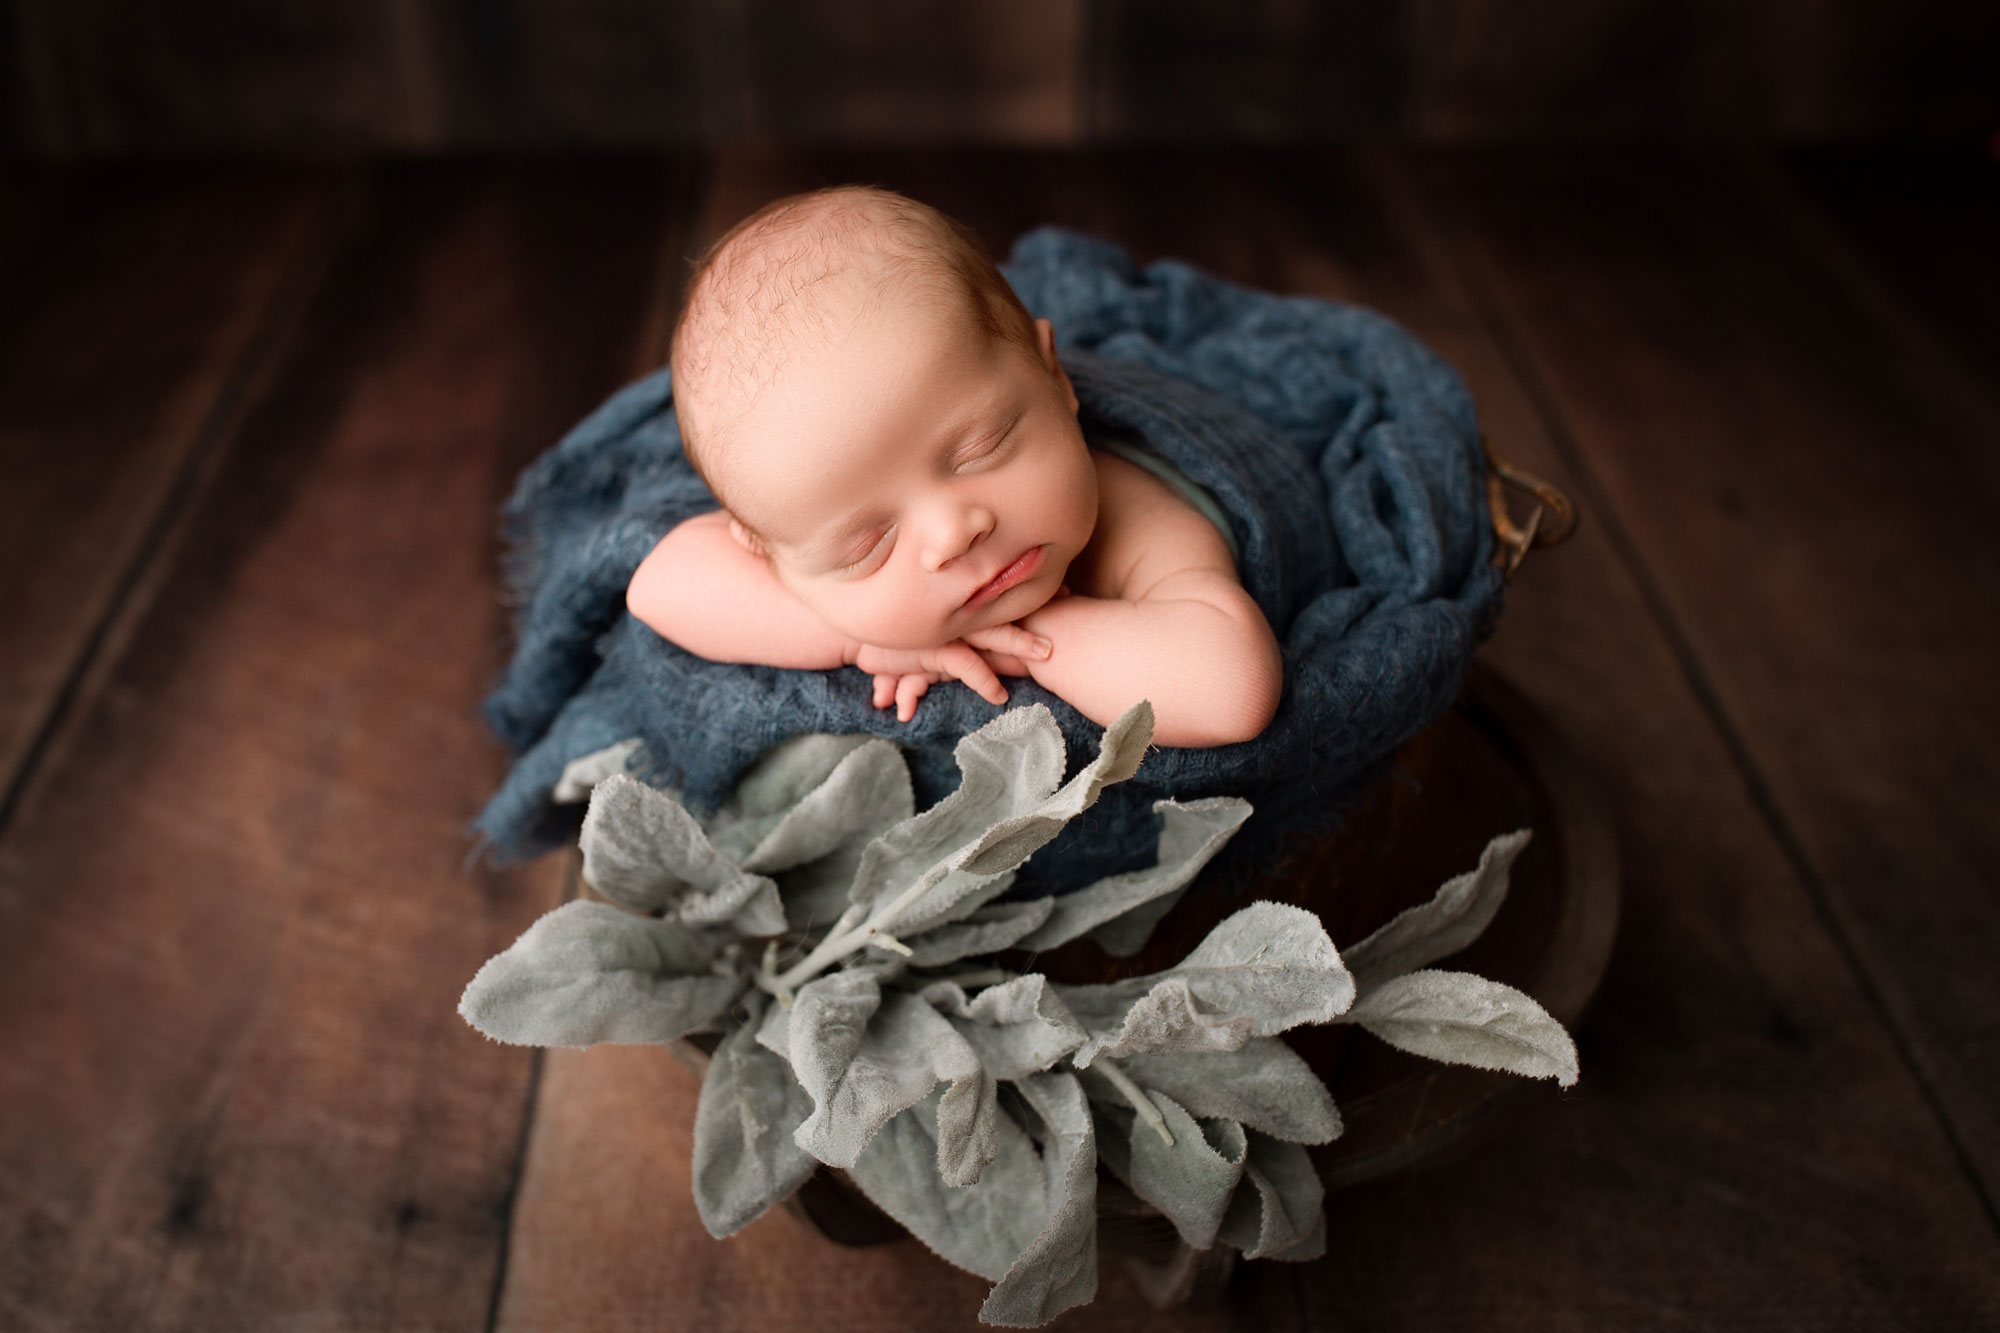 baby boy newborn pictures nj, baby sleeping in bucket with blue blanket against wooden backdrop